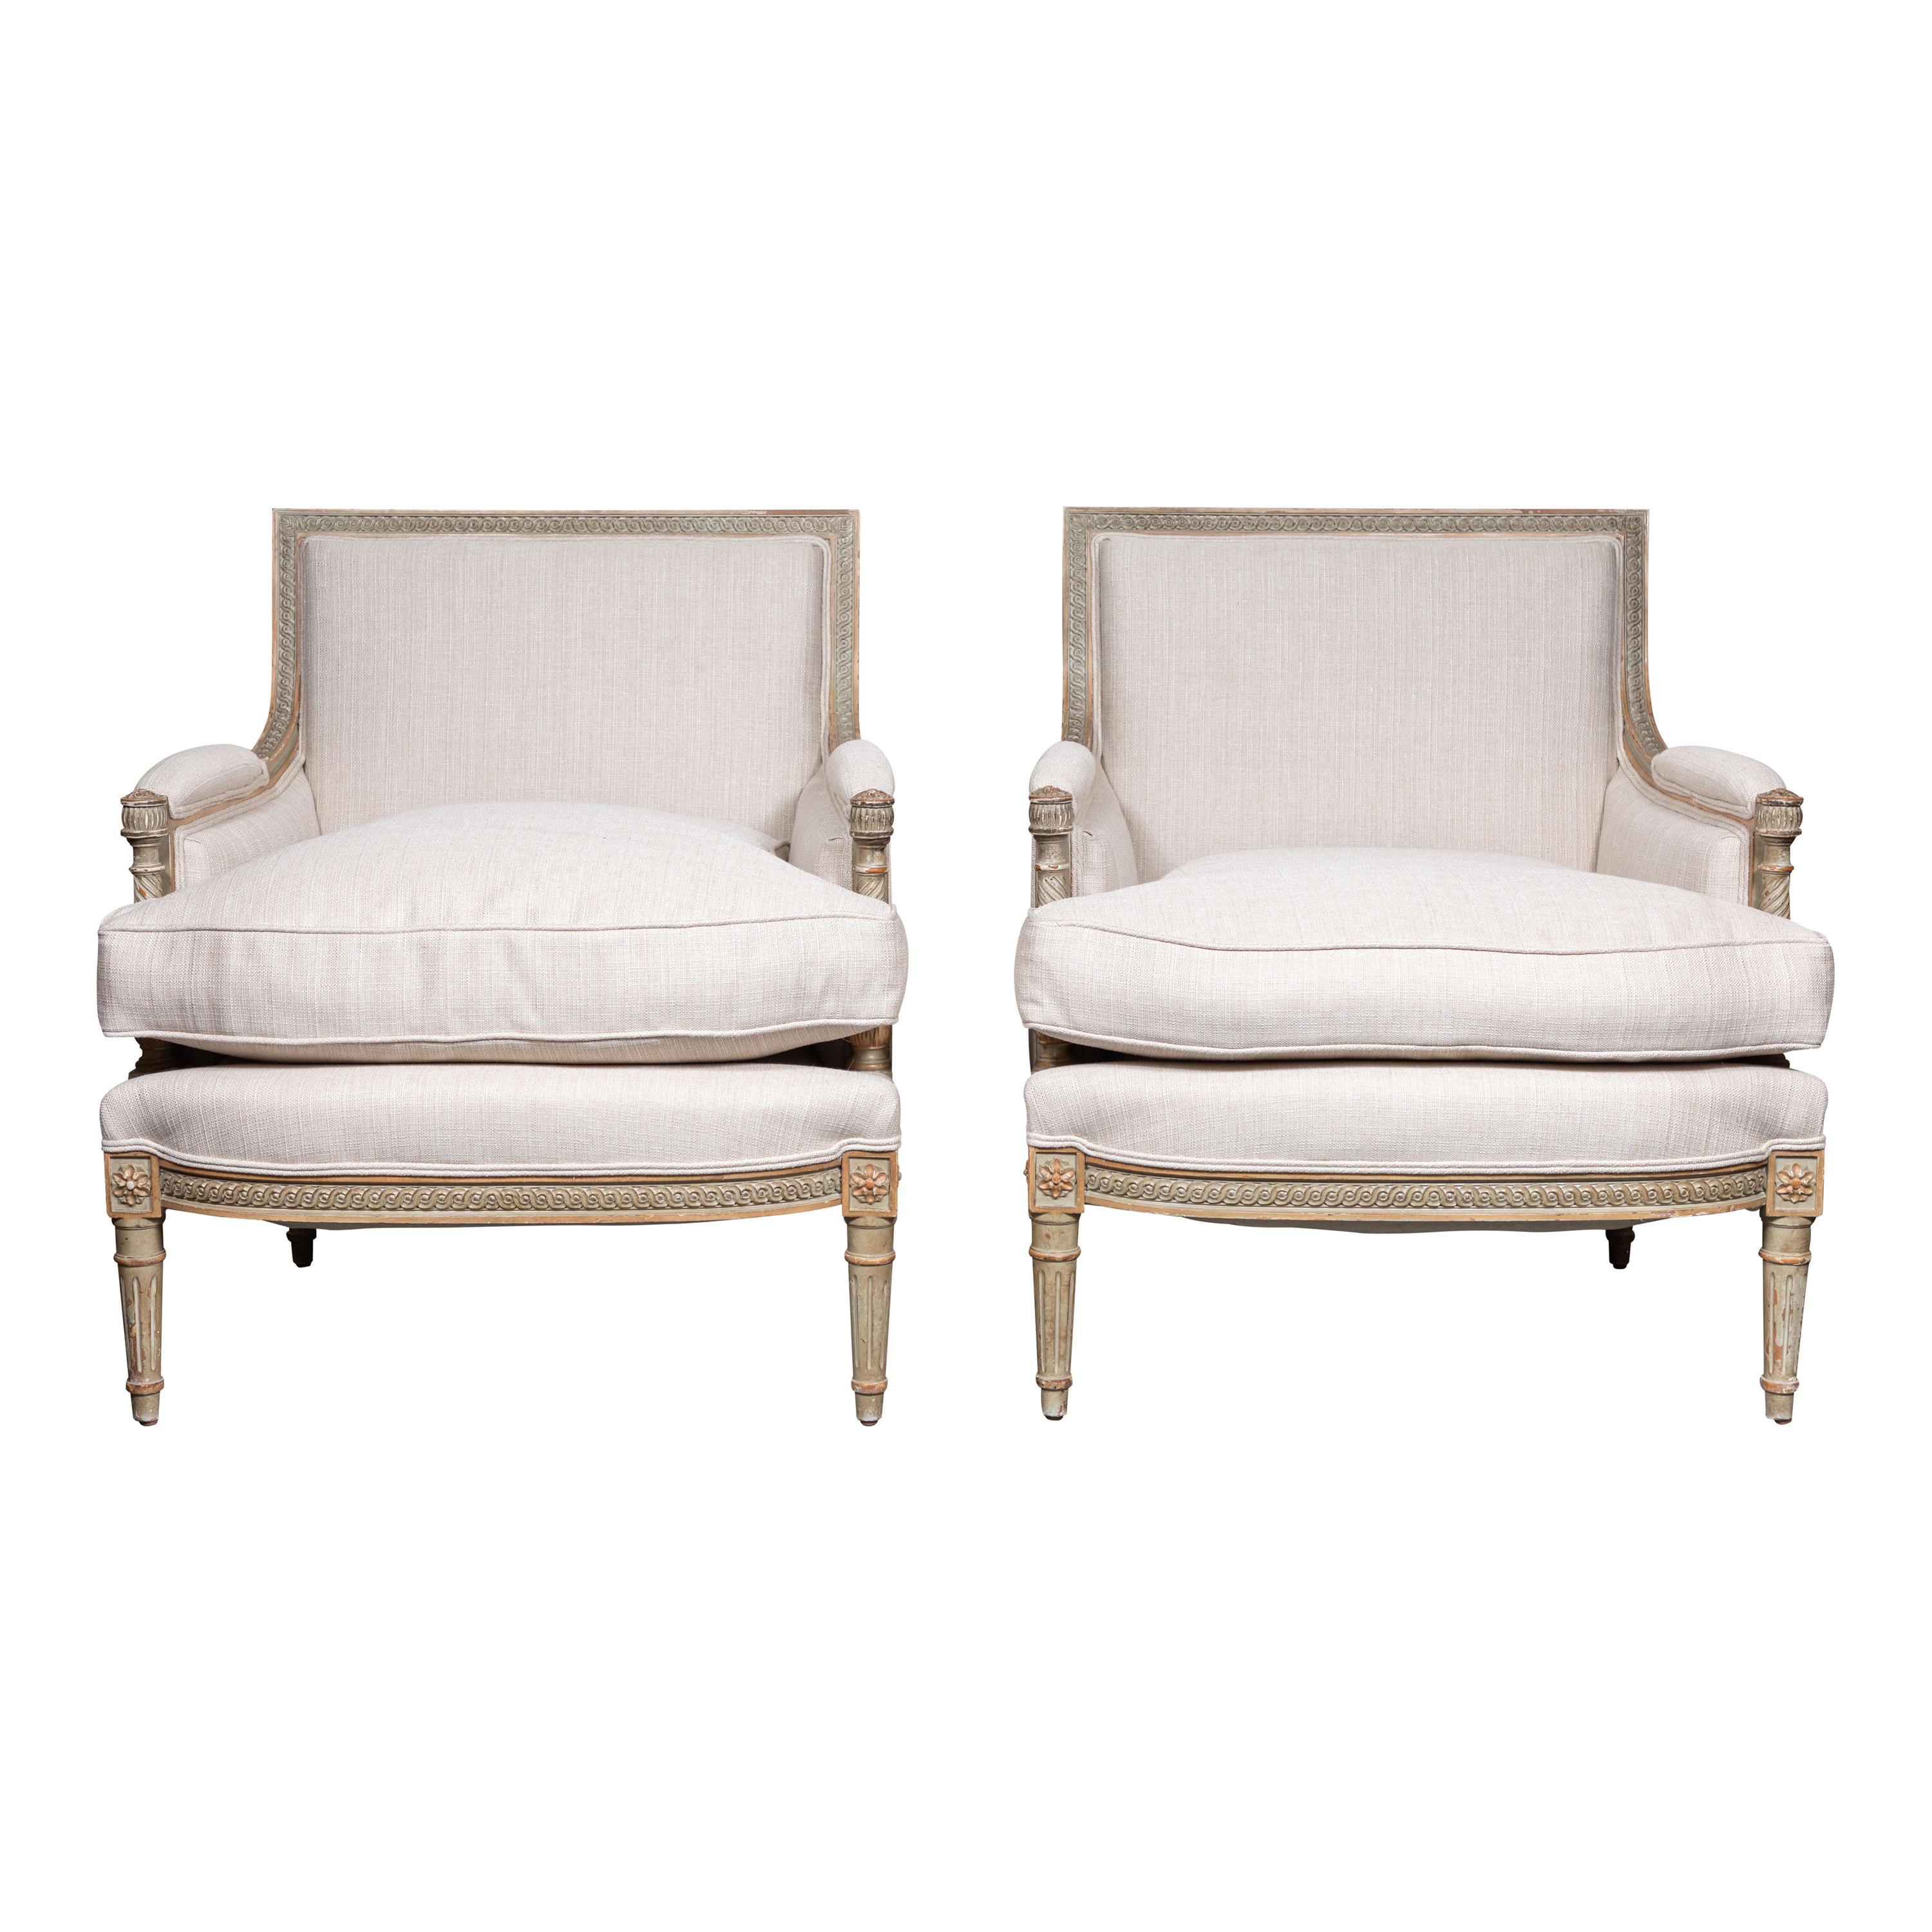 Pair of Period, French Marquis Chairs